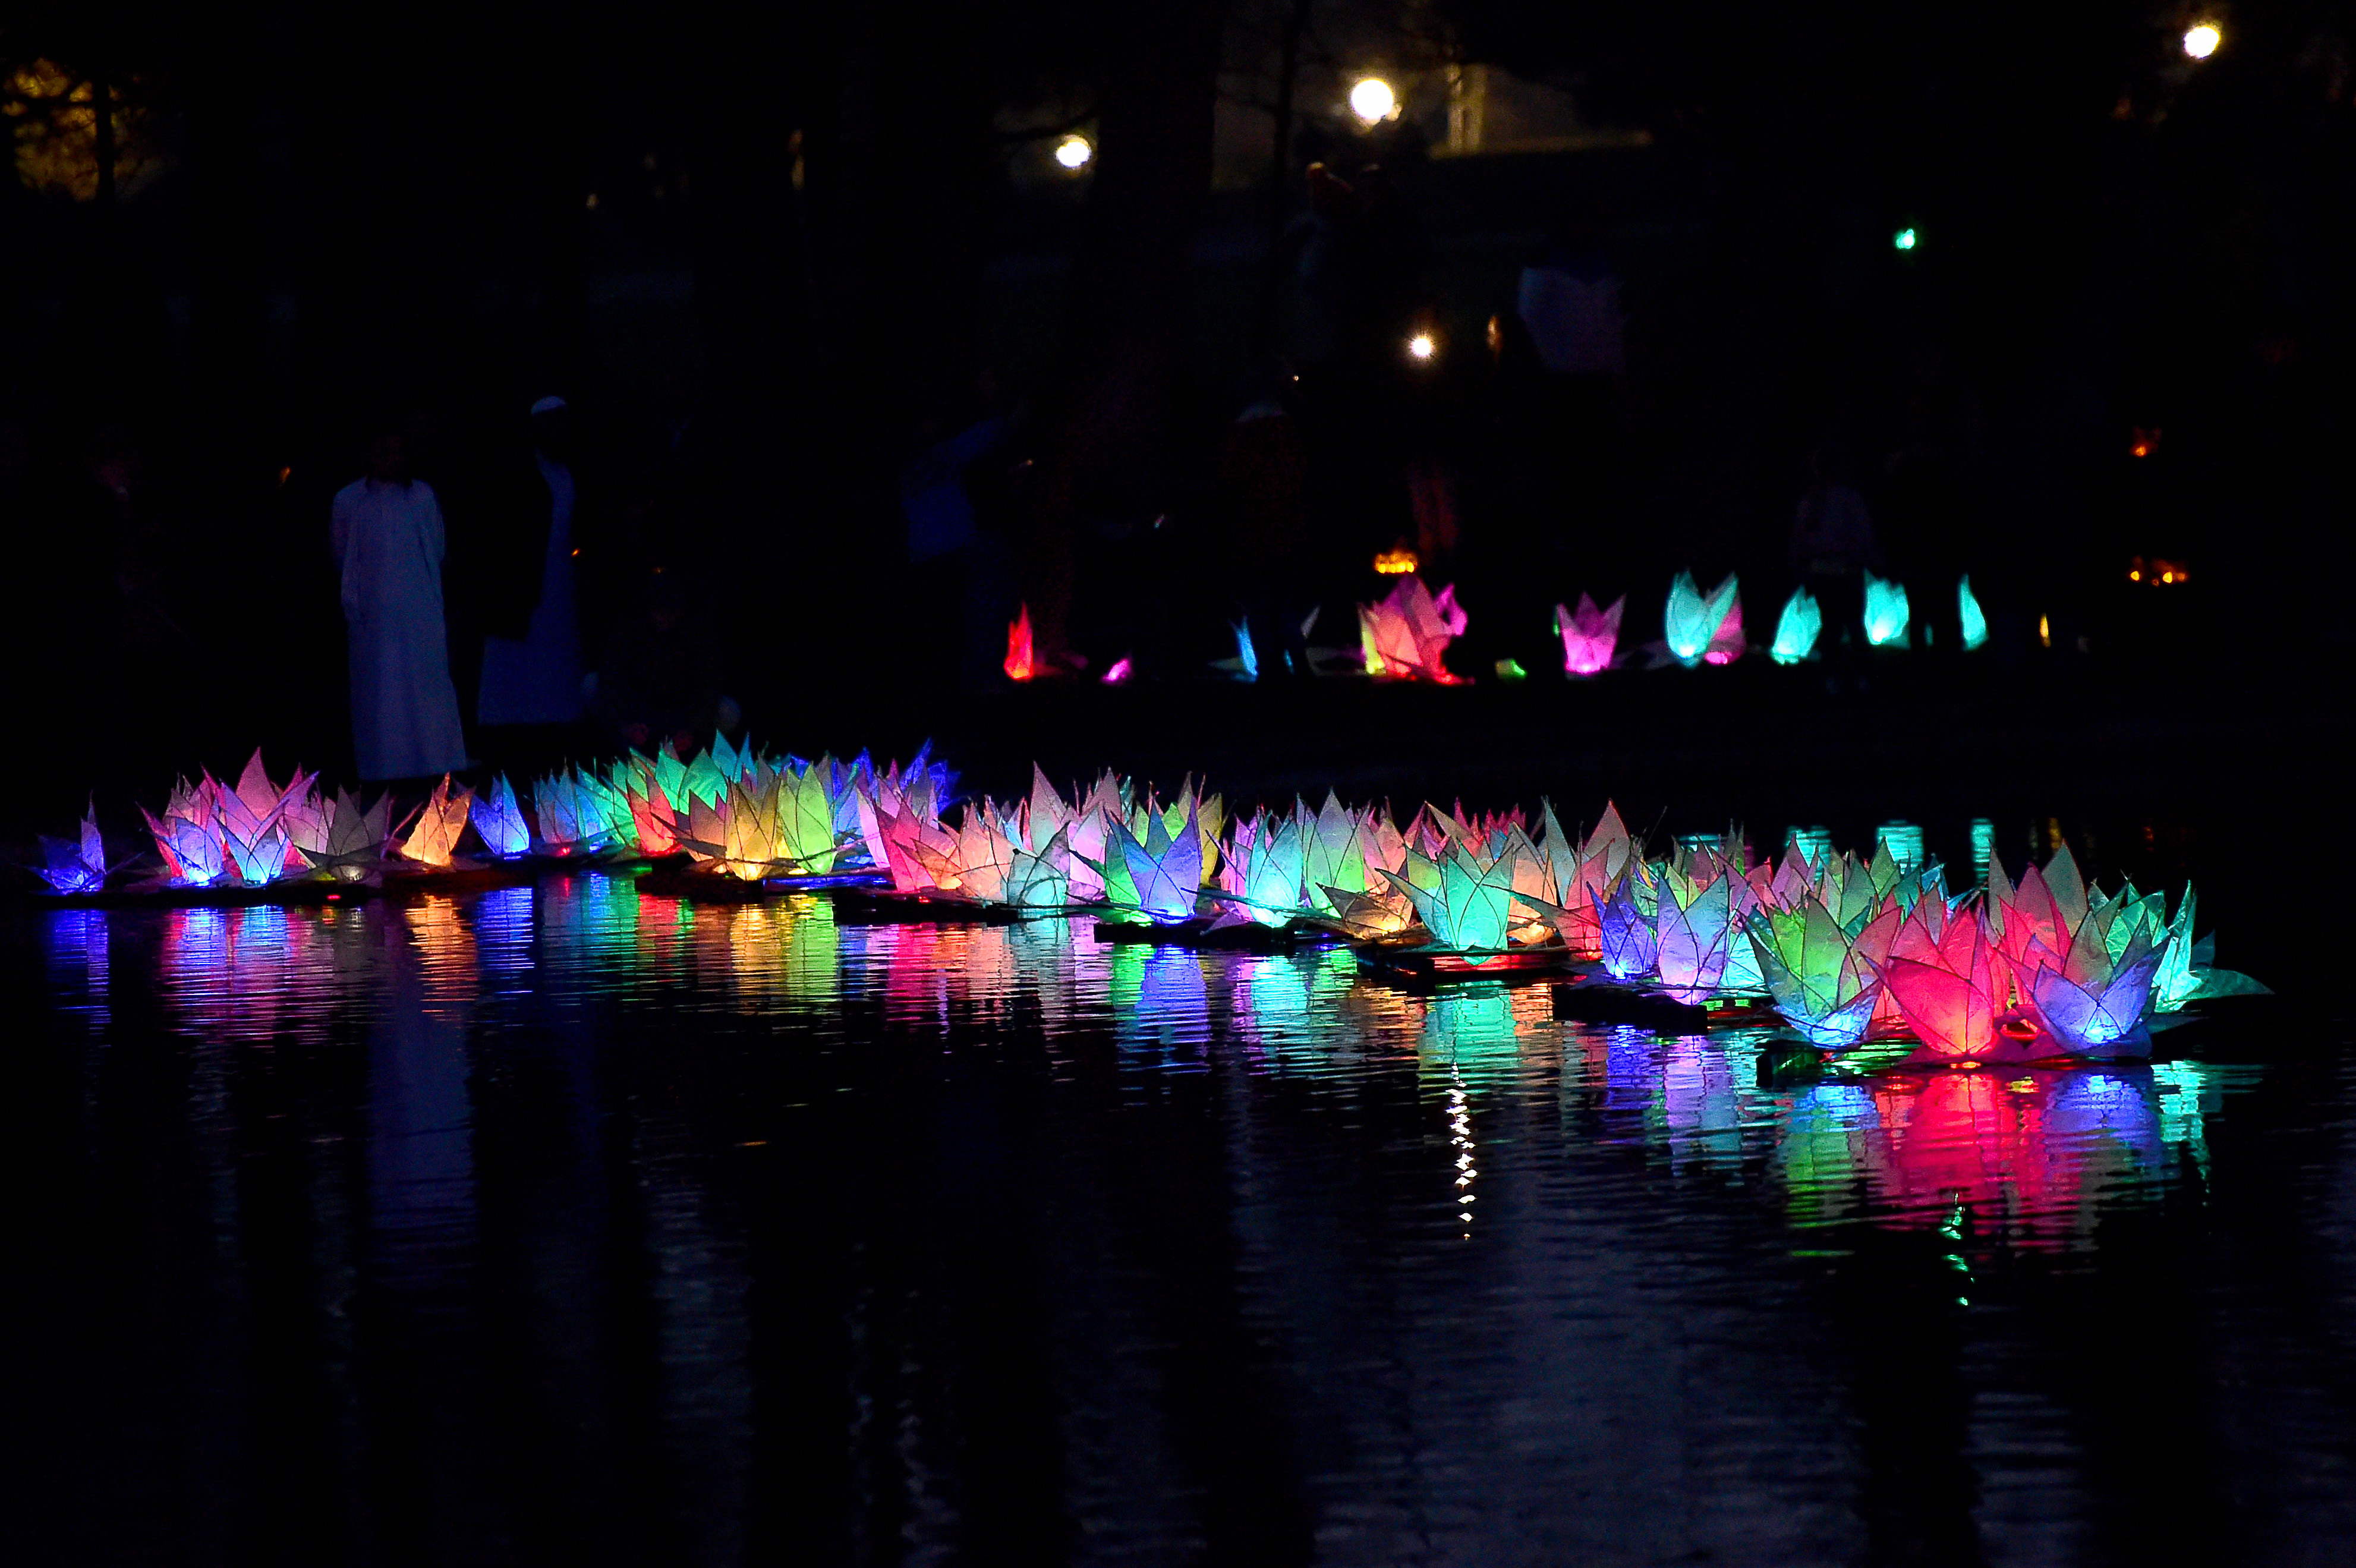 Lit up water lily sculptures on Boultham Park Lake